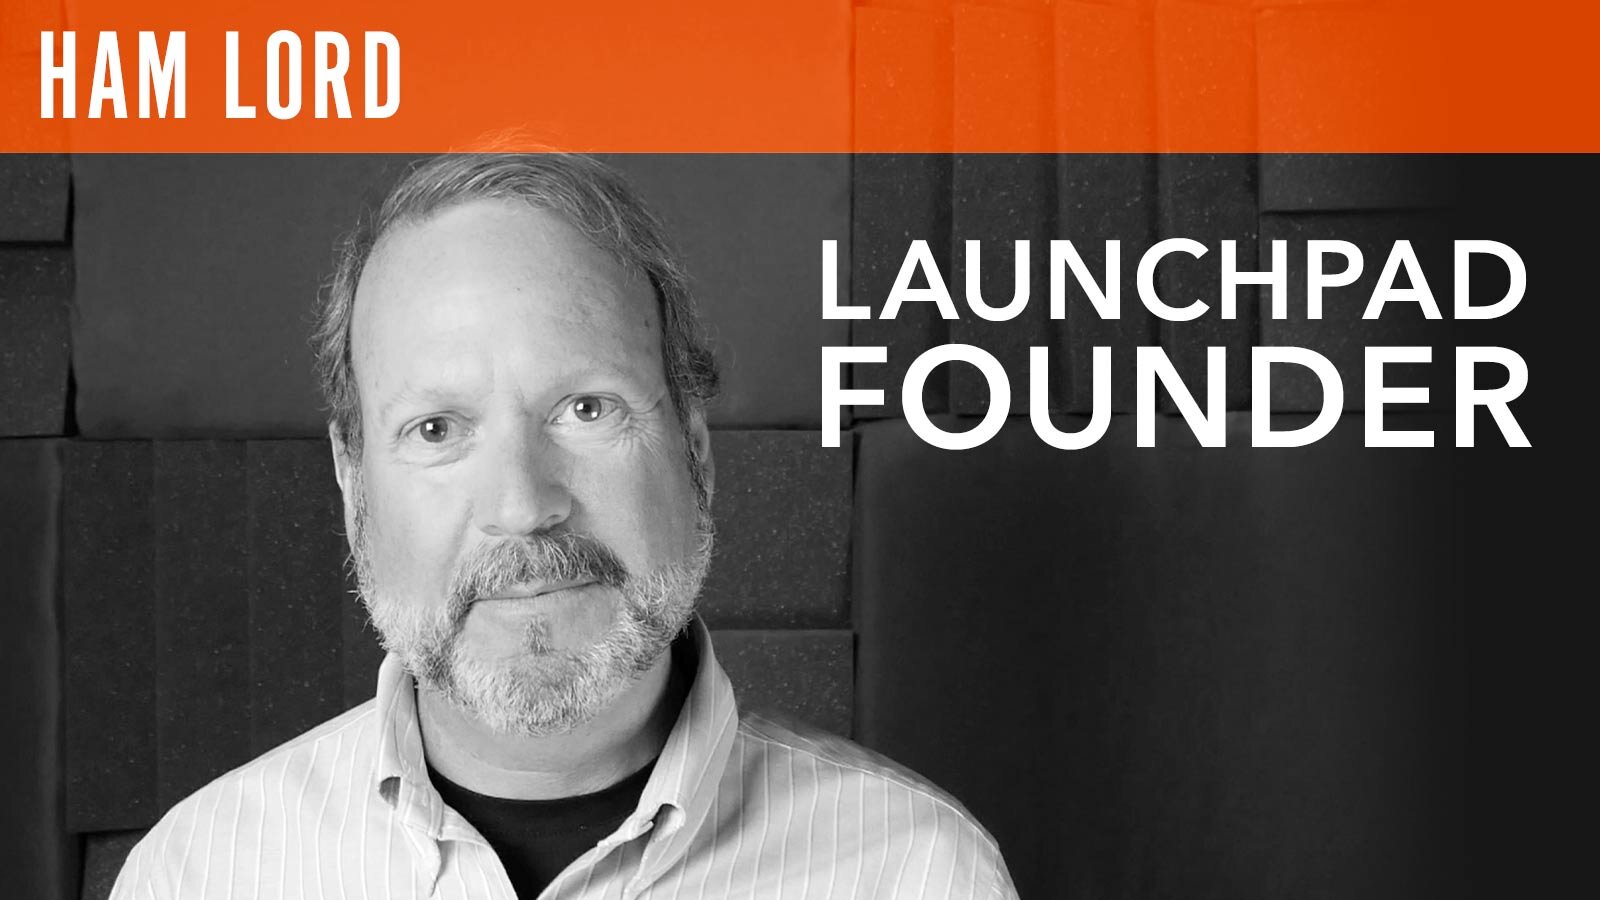 Ham Lord, "Launchpad Founder"